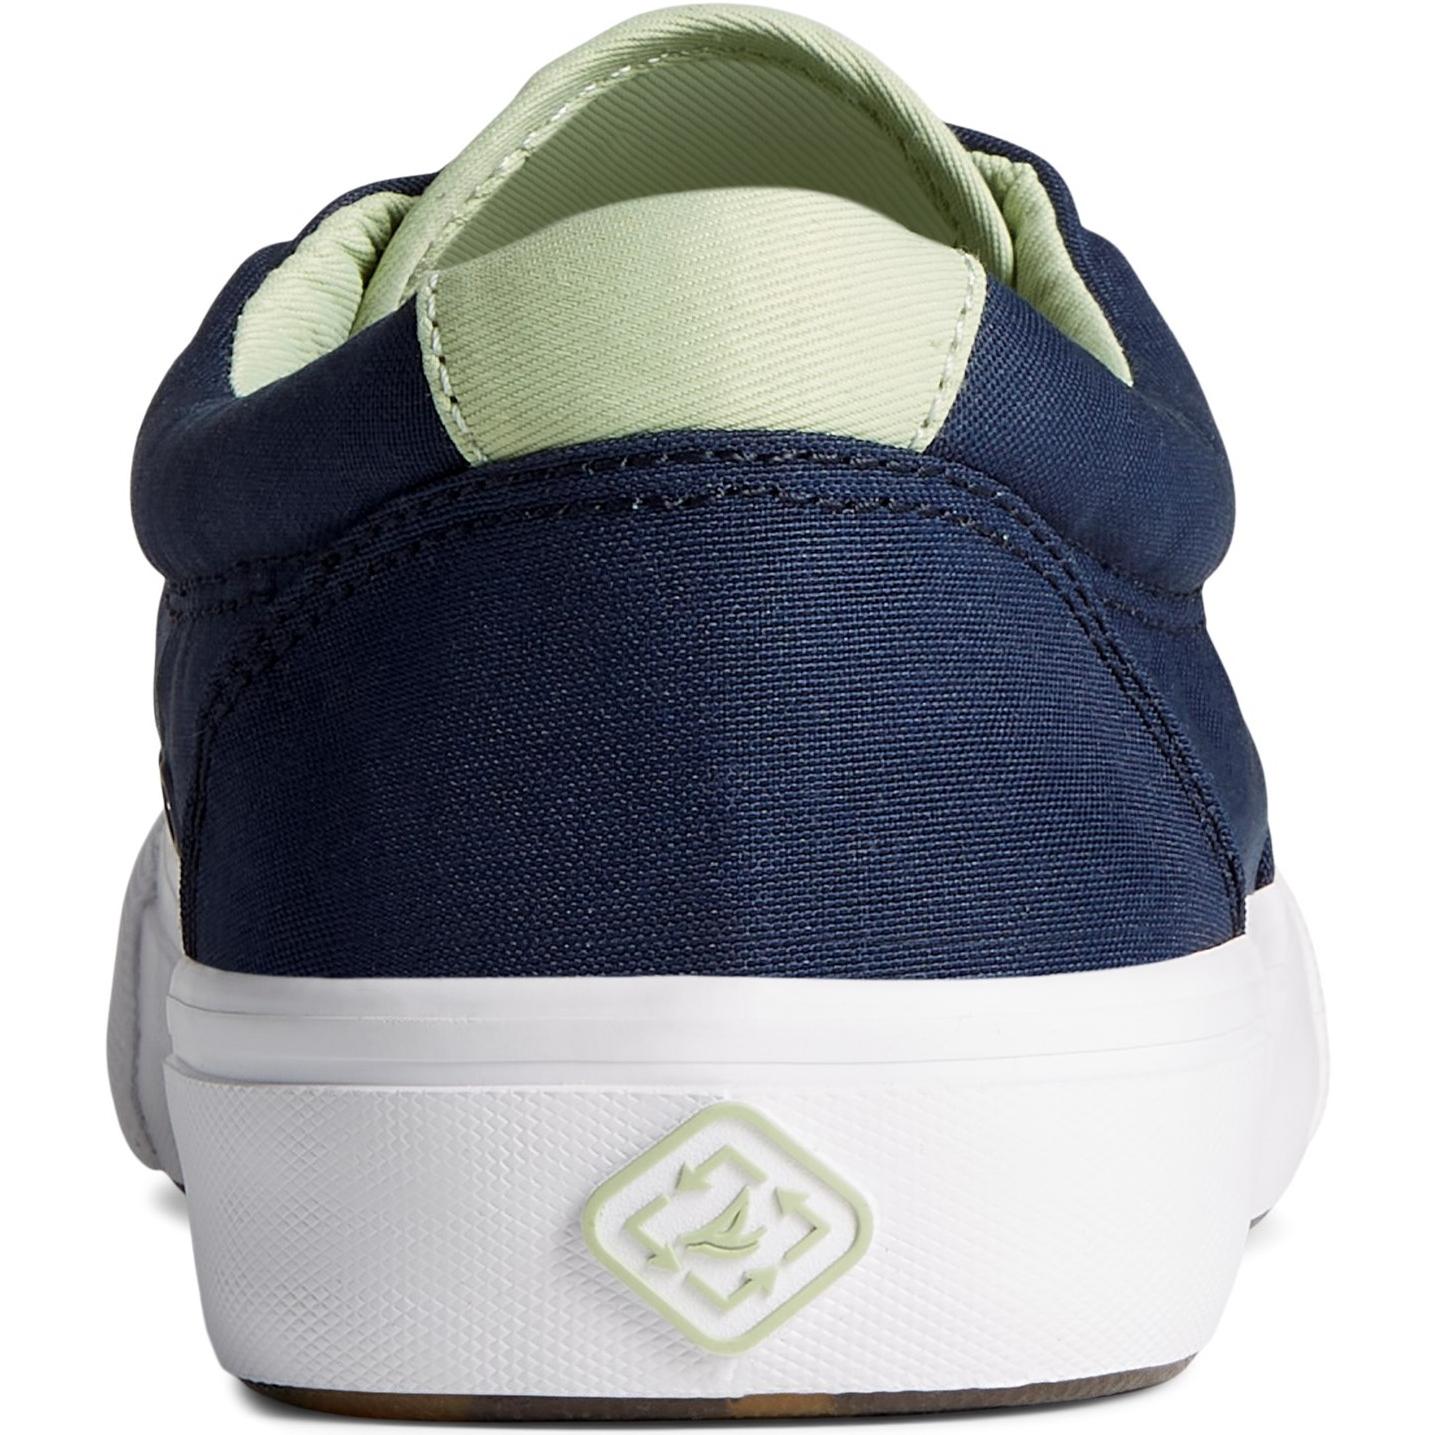 Sperry Top-sider Striper II CVO SeaCycled sneakers Shoes